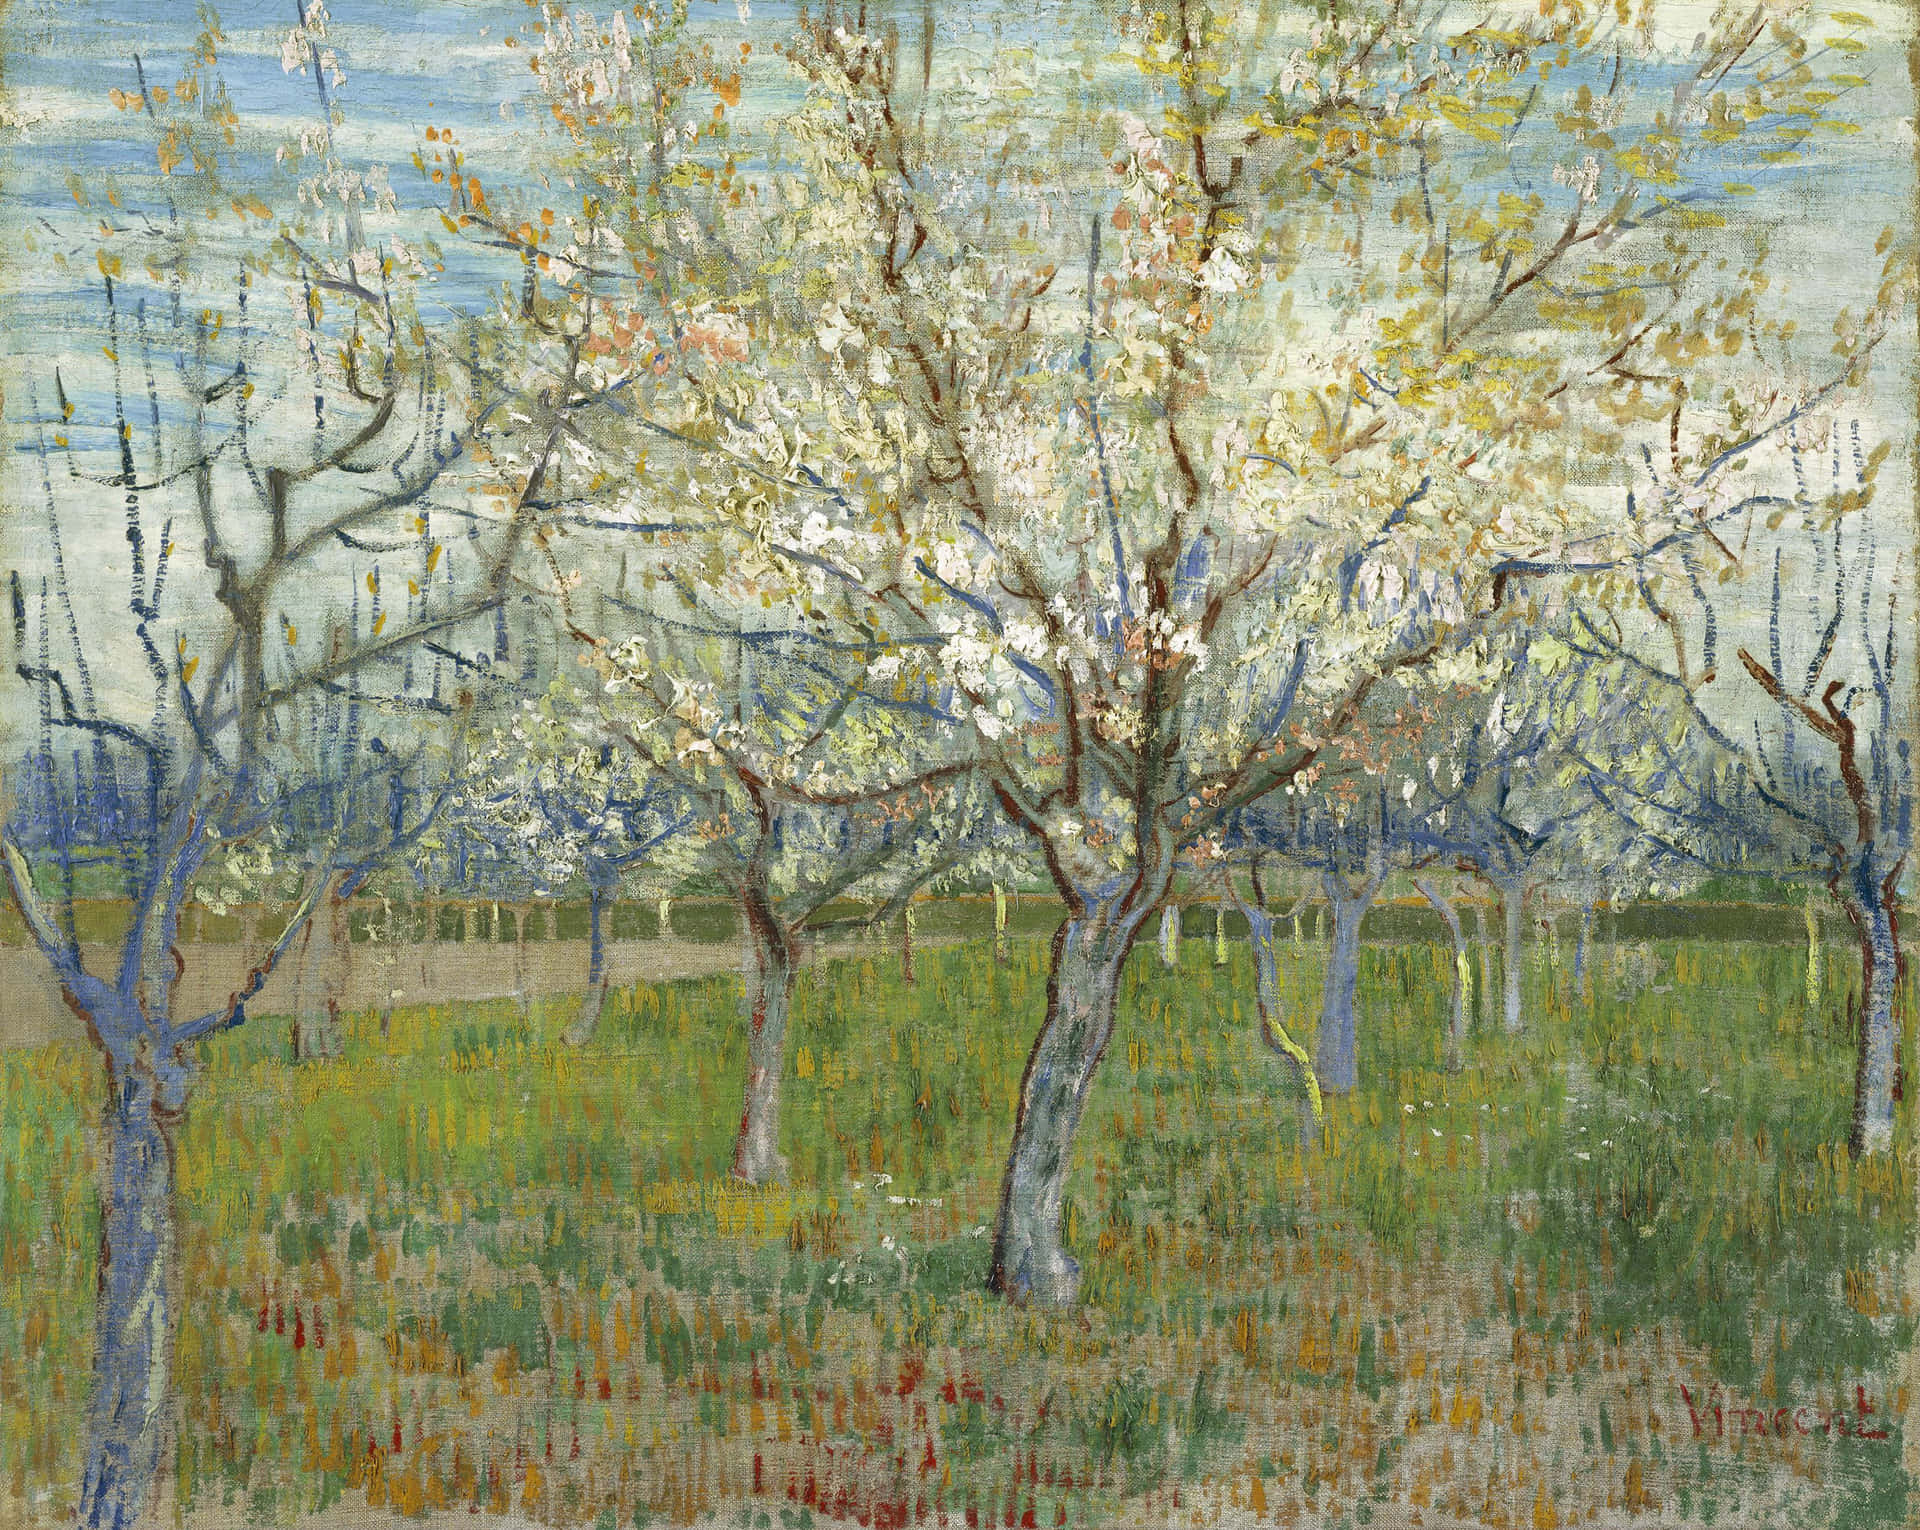 Famous Painting “Almond Blossoms” by Vincent Van Gogh Wallpaper